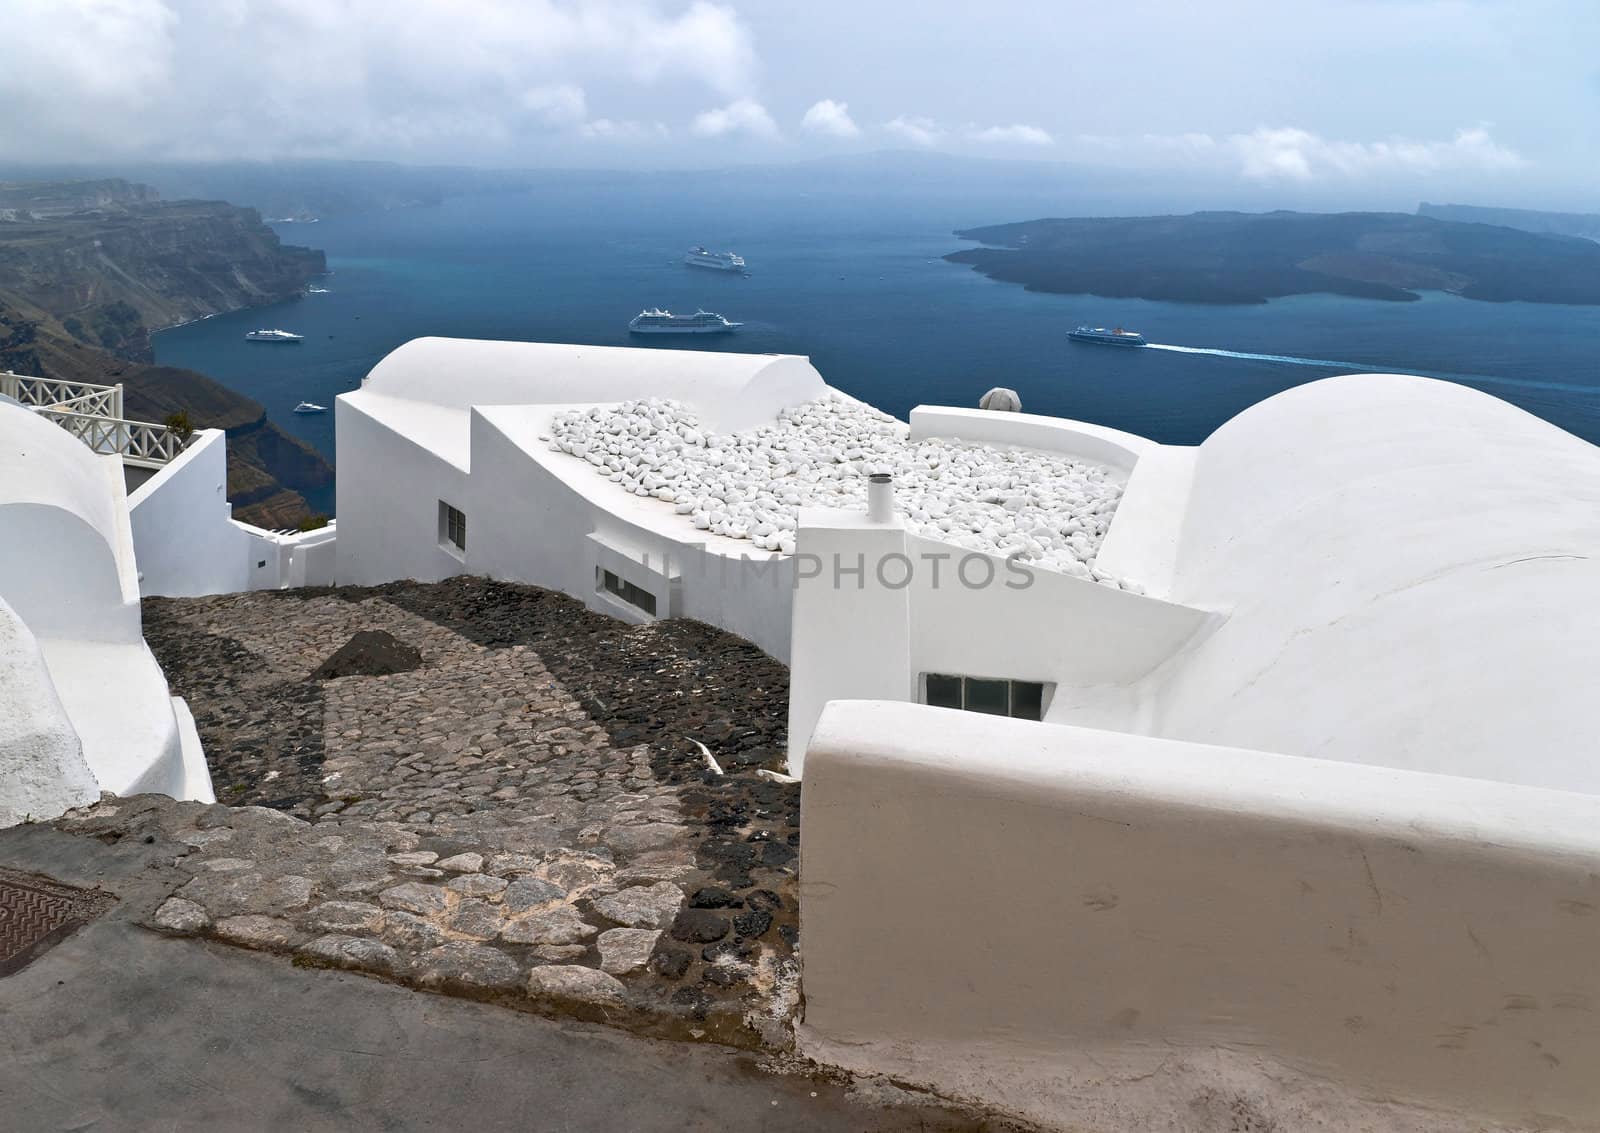 Caldera view in Santorini island with white buildings and ships
